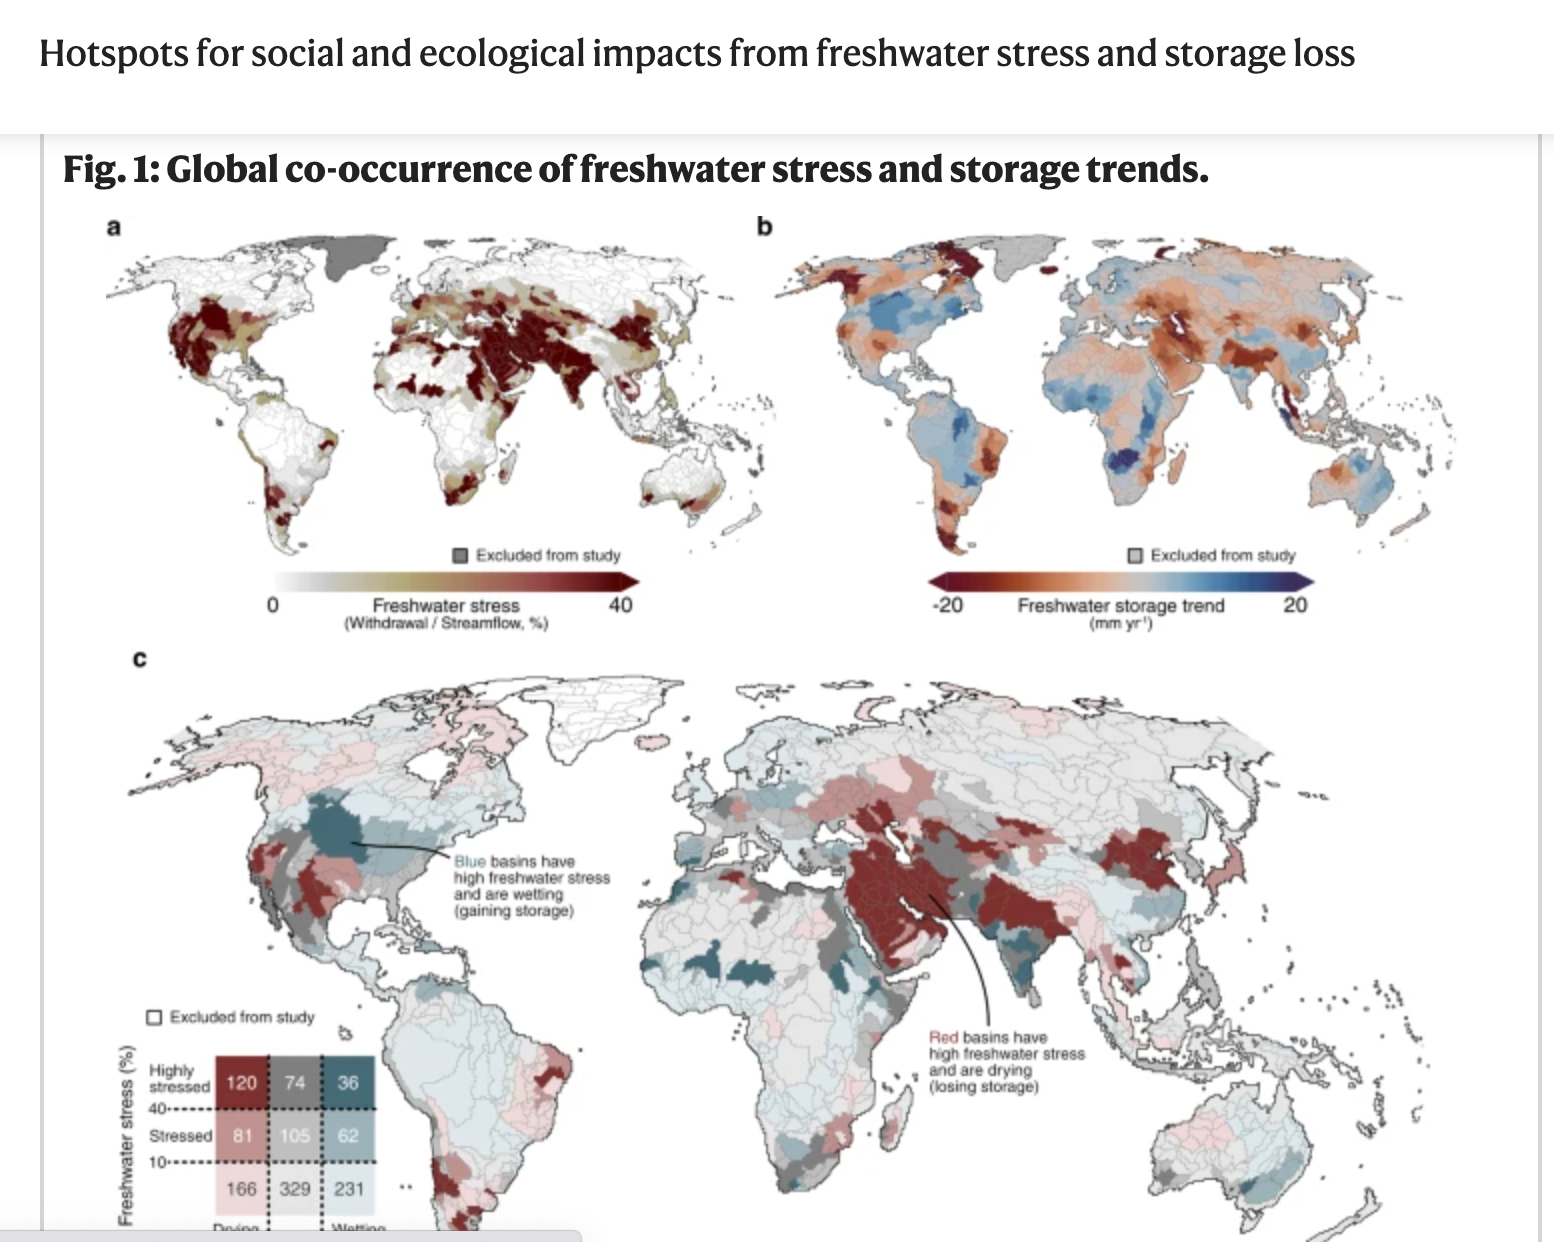 Hotspots for social and ecological impacts from freshwater stress and storage loss